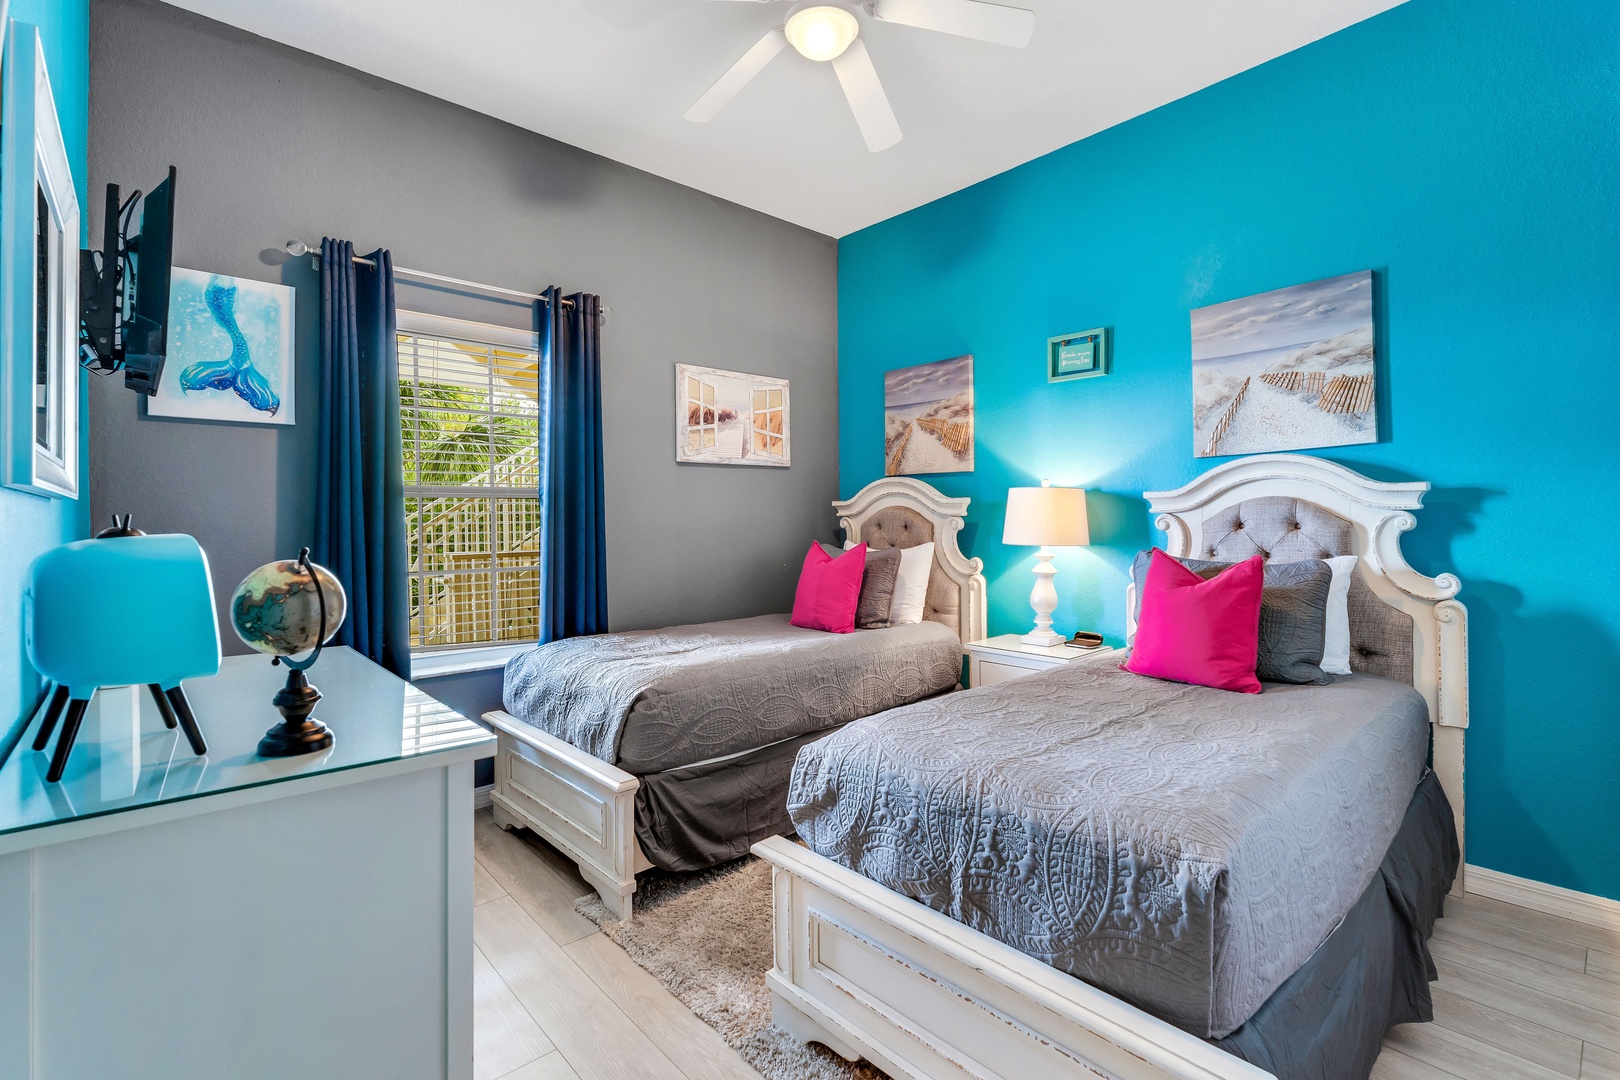 The third bedroom sanctuary offers a pair of plush twin beds & Smart TV